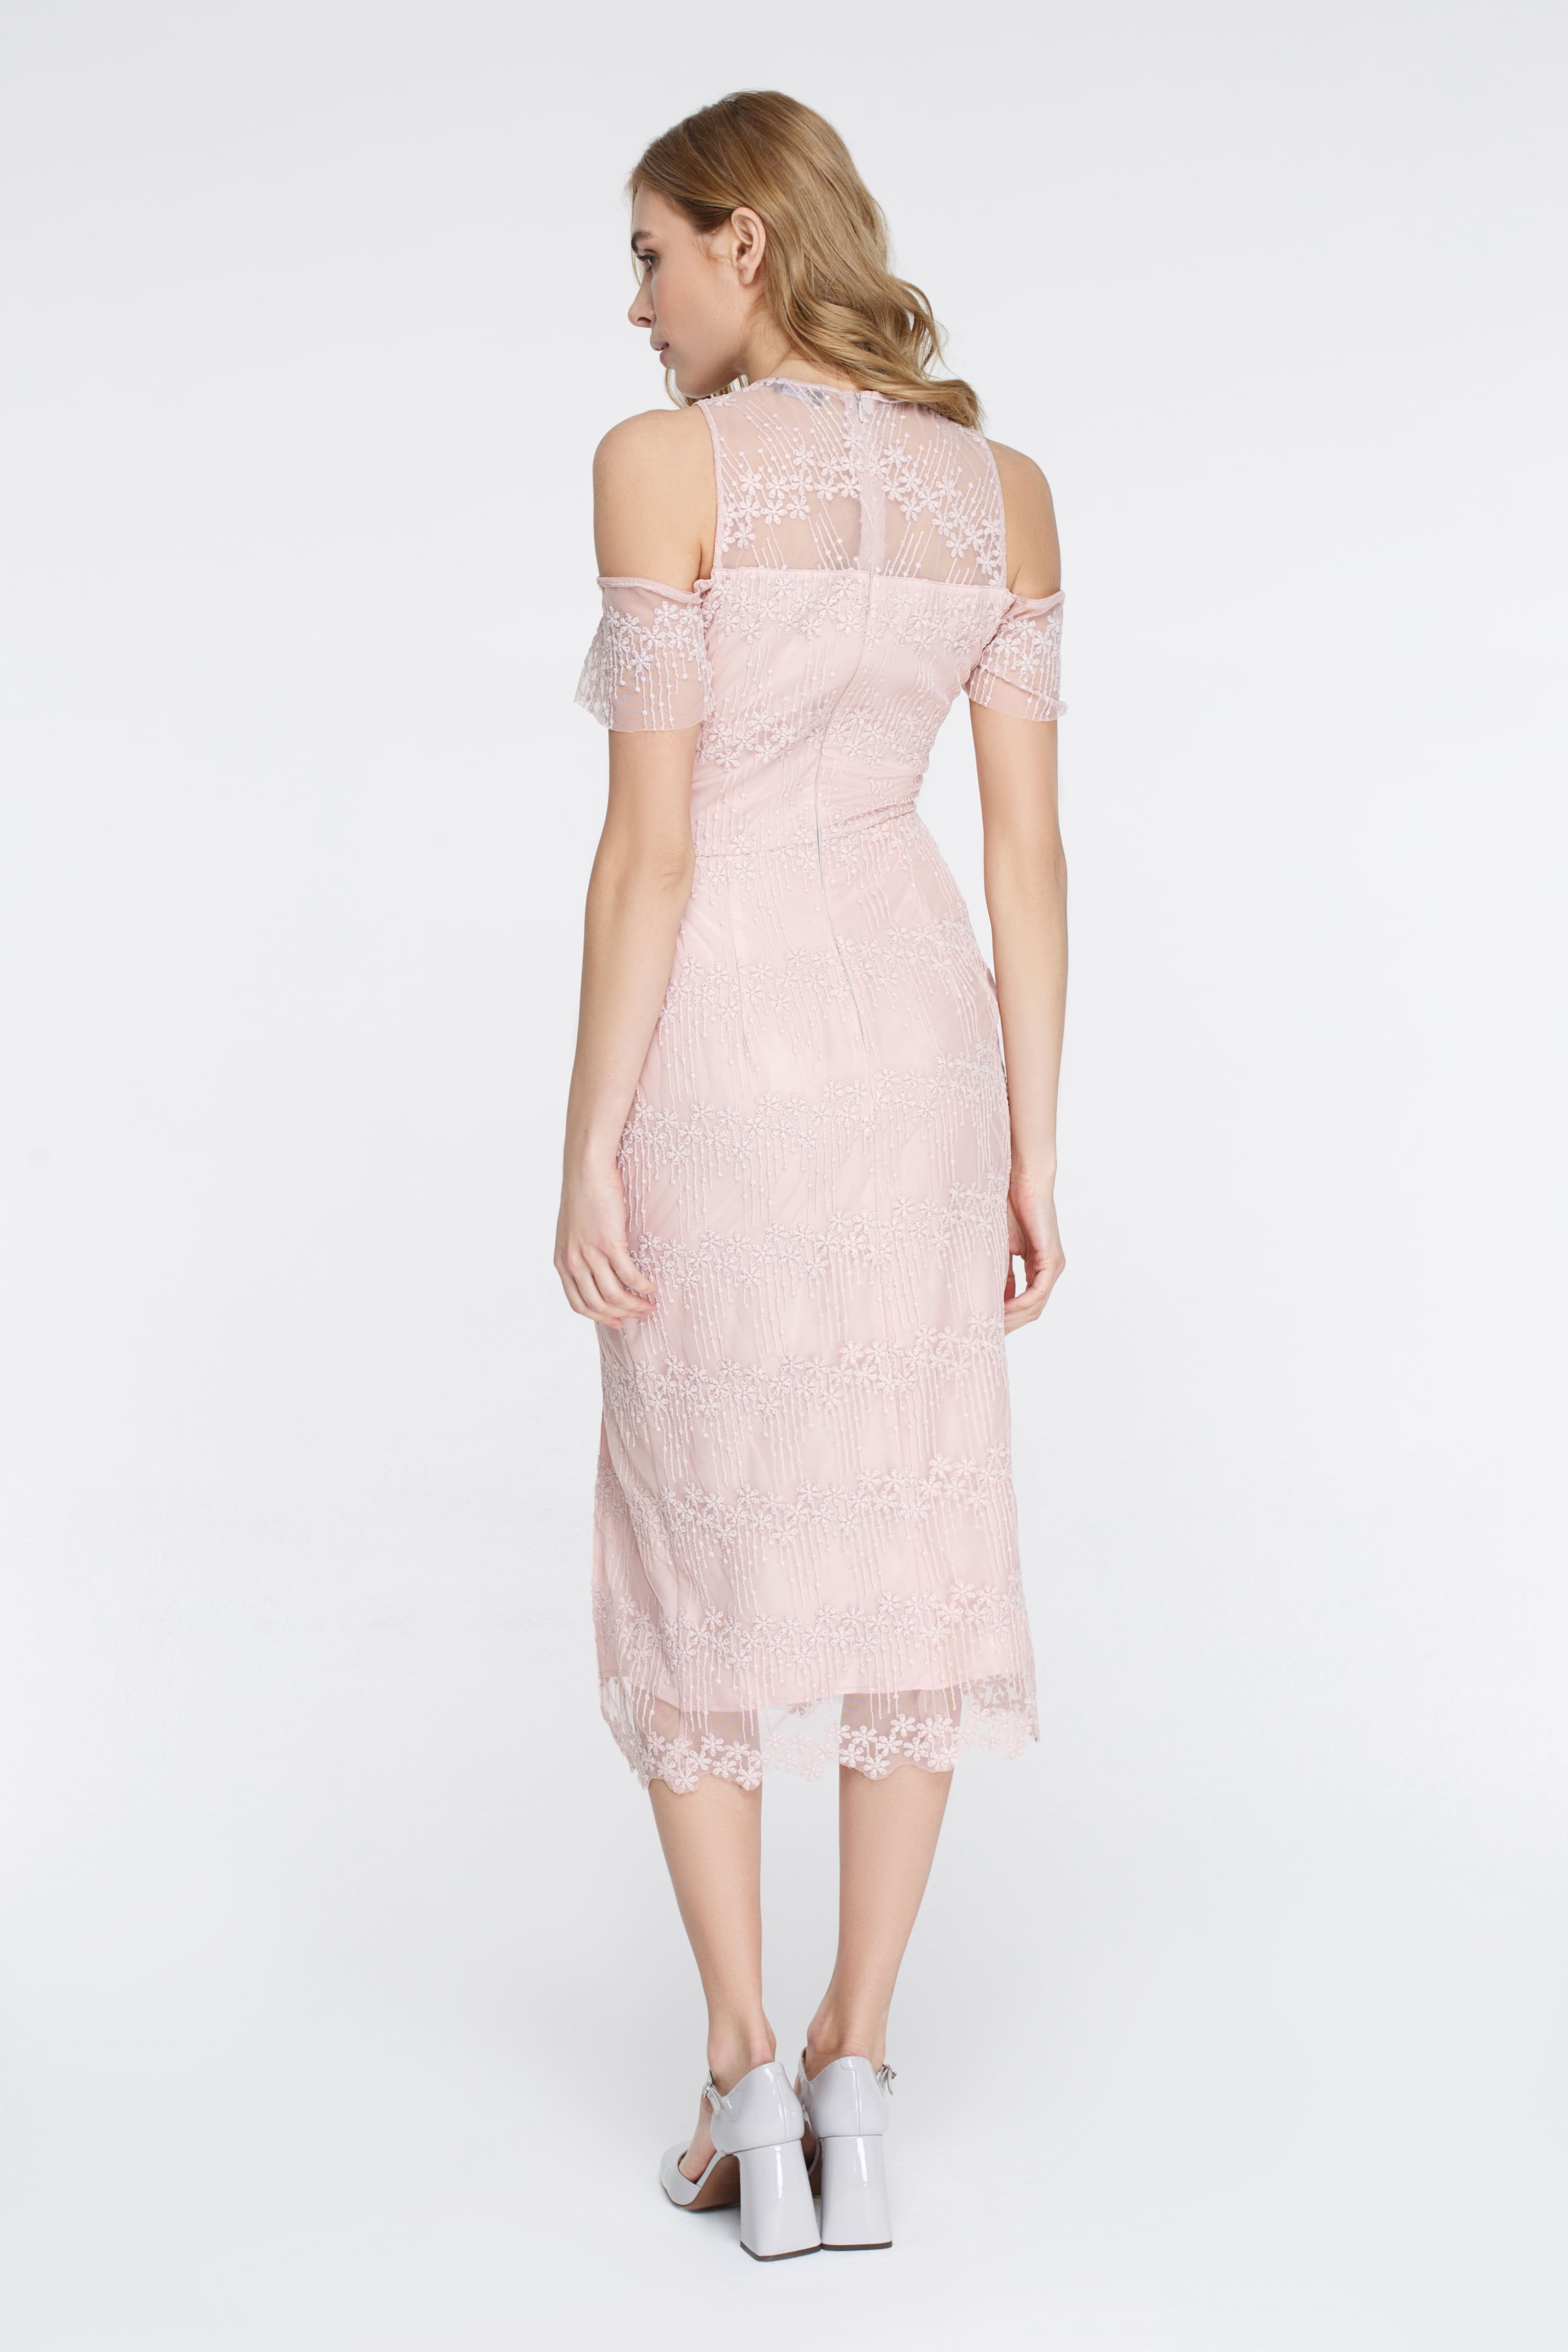 Powdery lace dress with open shoulders, photo 6